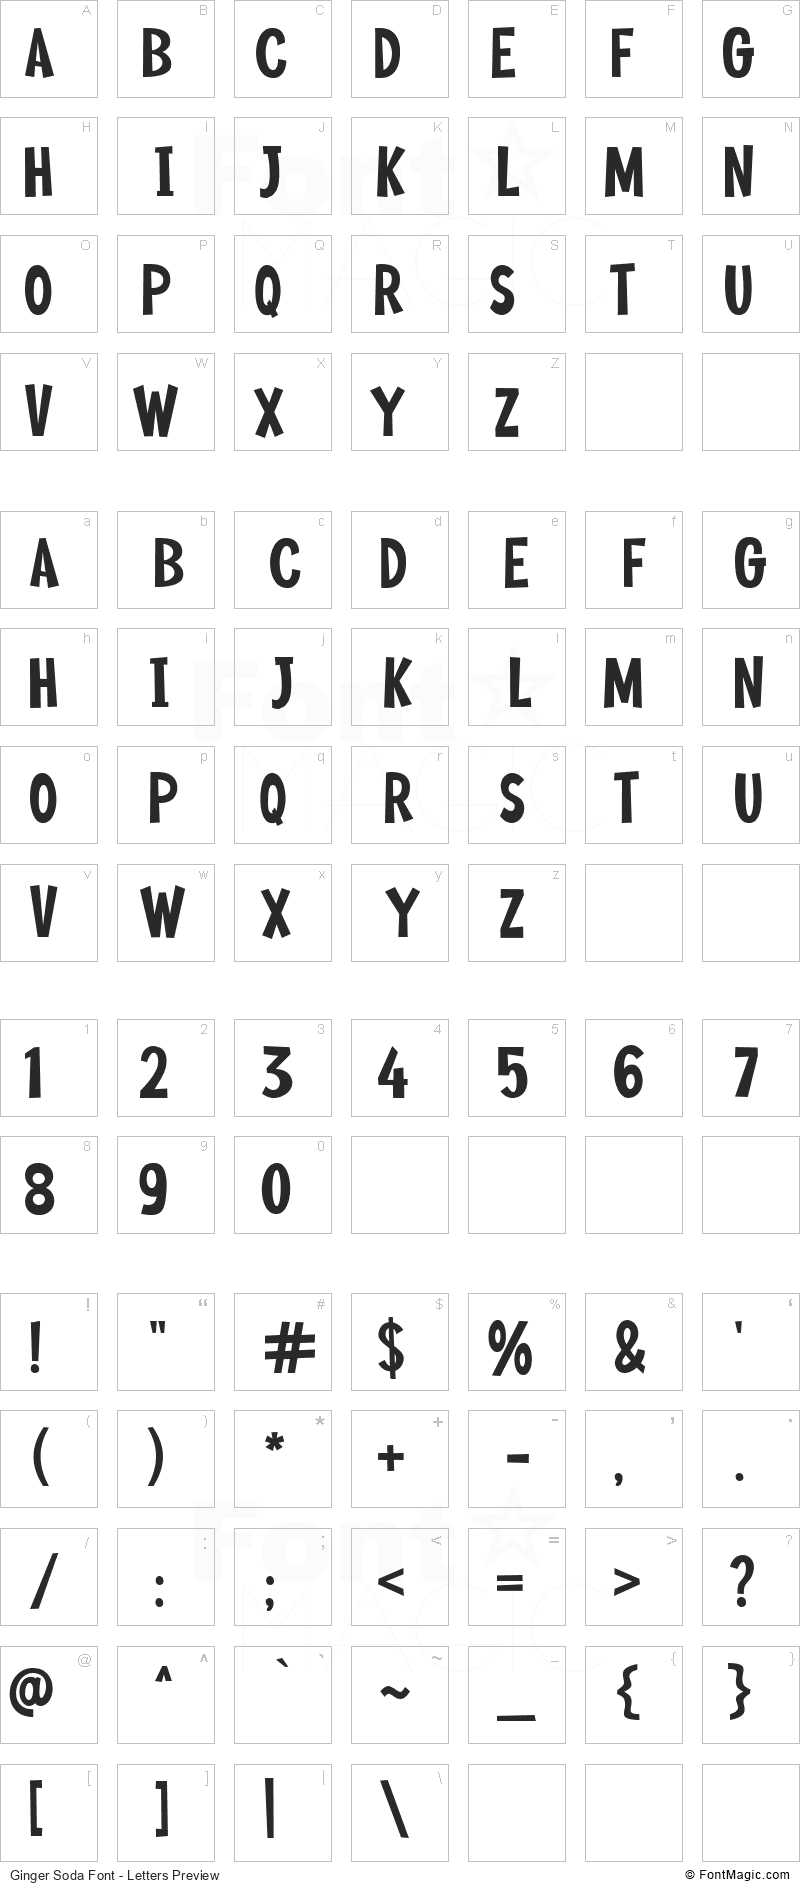 Ginger Soda Font - All Latters Preview Chart